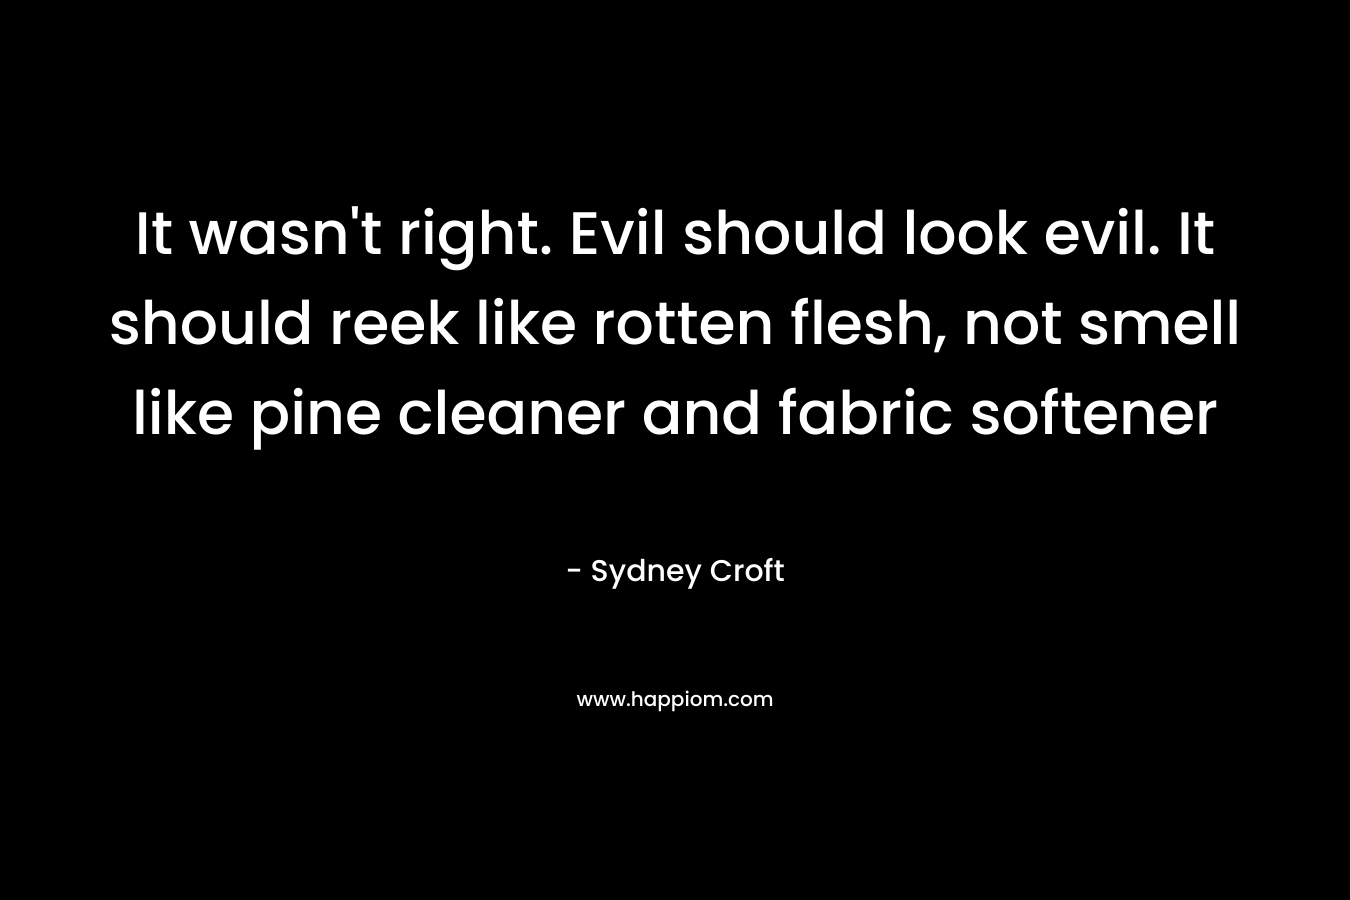 It wasn't right. Evil should look evil. It should reek like rotten flesh, not smell like pine cleaner and fabric softener